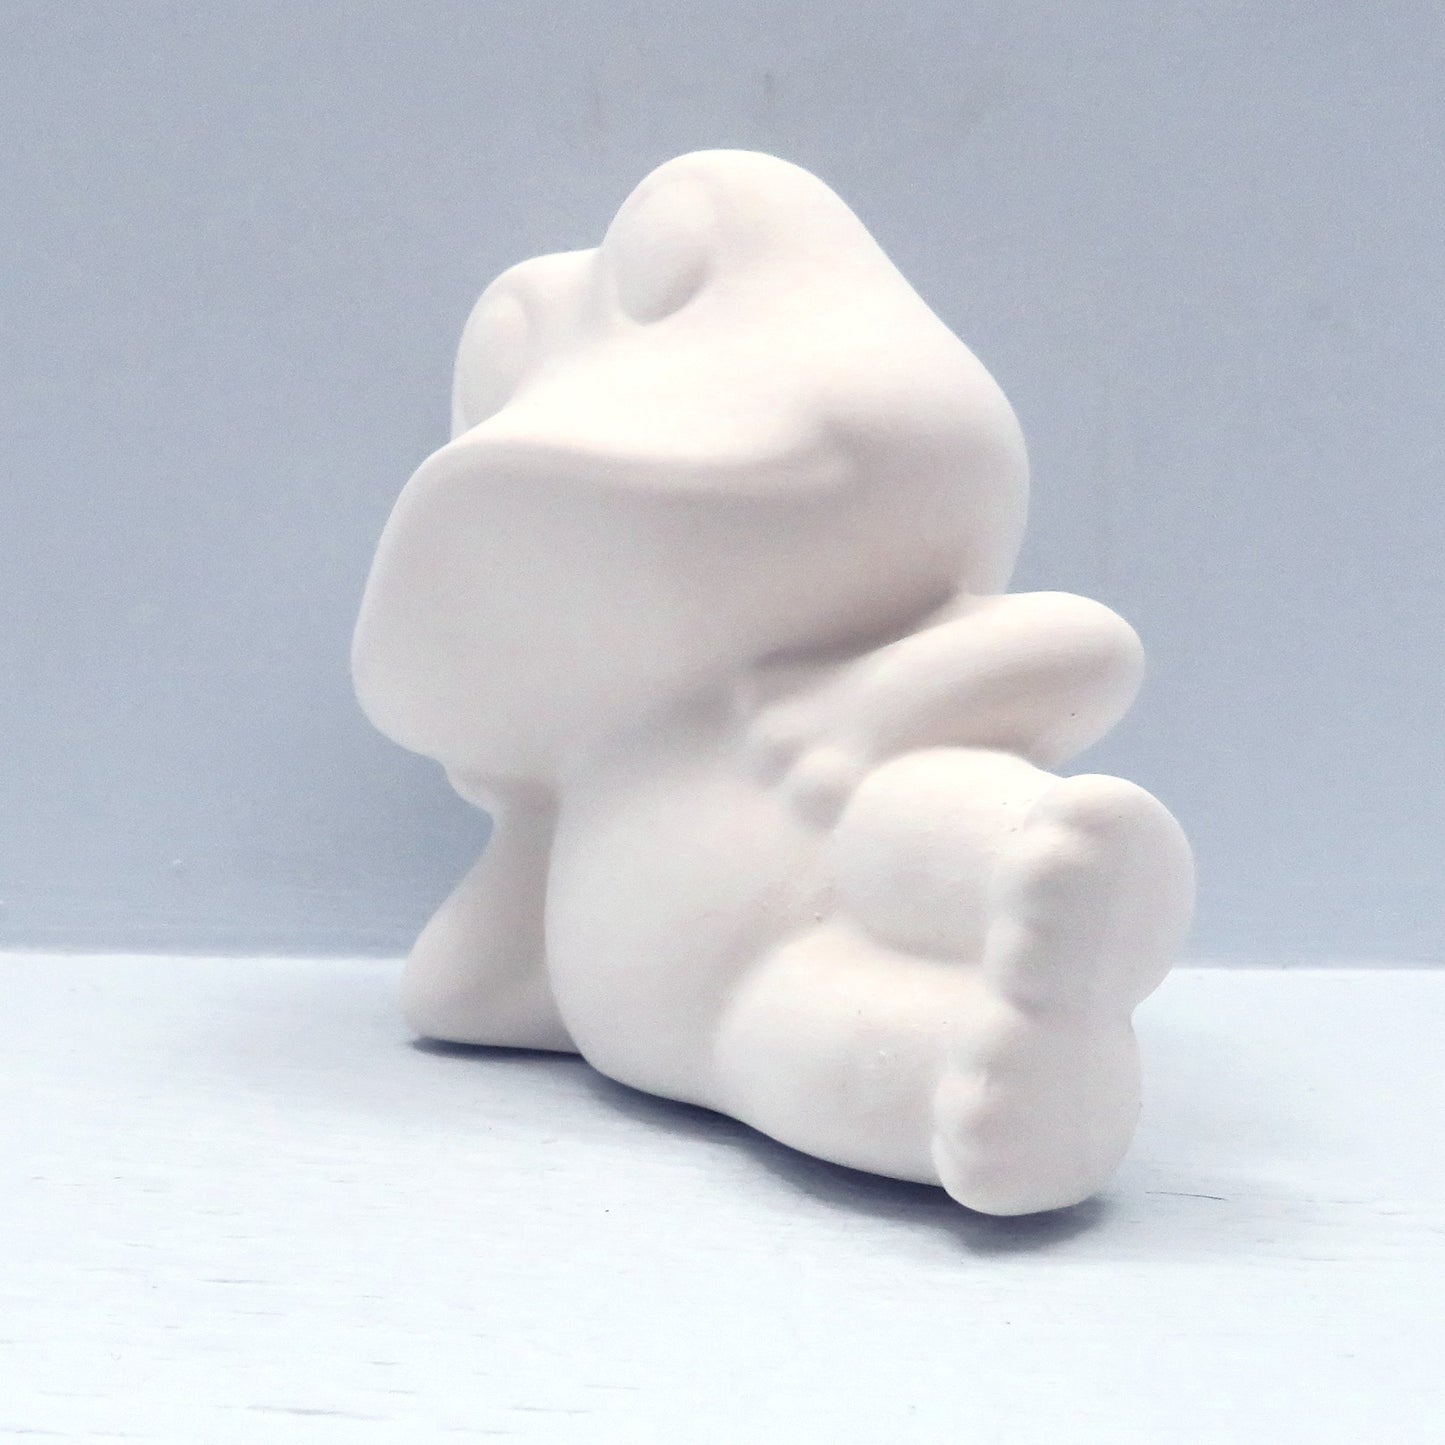 Unpainted Ceramic Frog Figurine, Ready to Paint Bisqueware Frog Statue, Frog Lover Gift, Ceramics to Paint, Paintable Ceramic Frog Decor